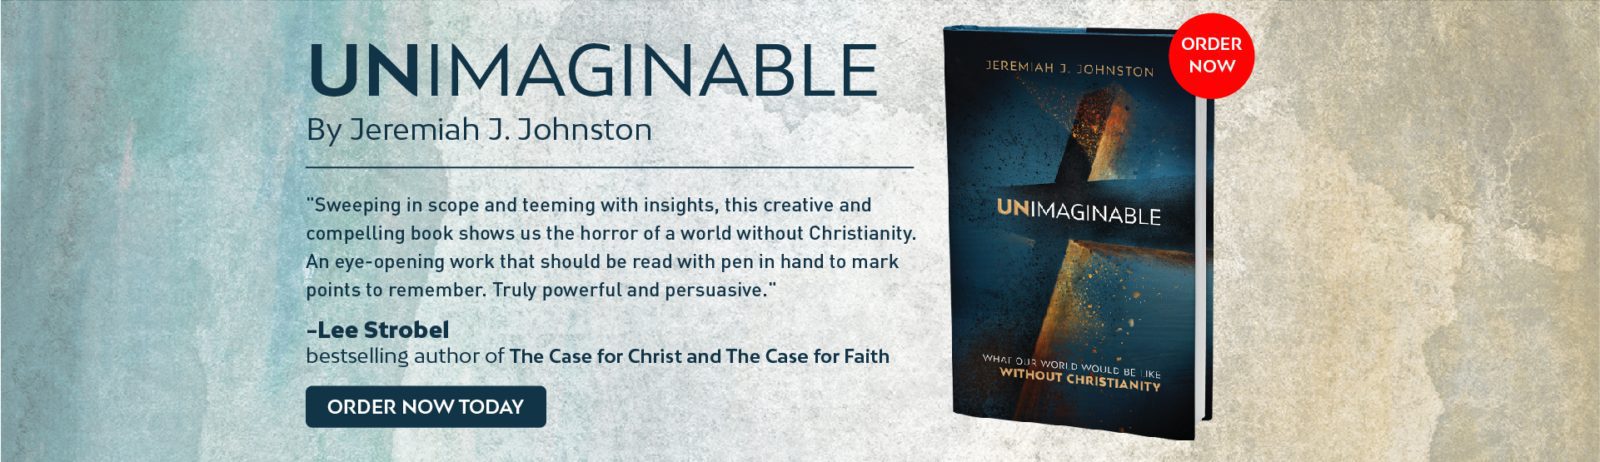 Order your copy of Unimaginable